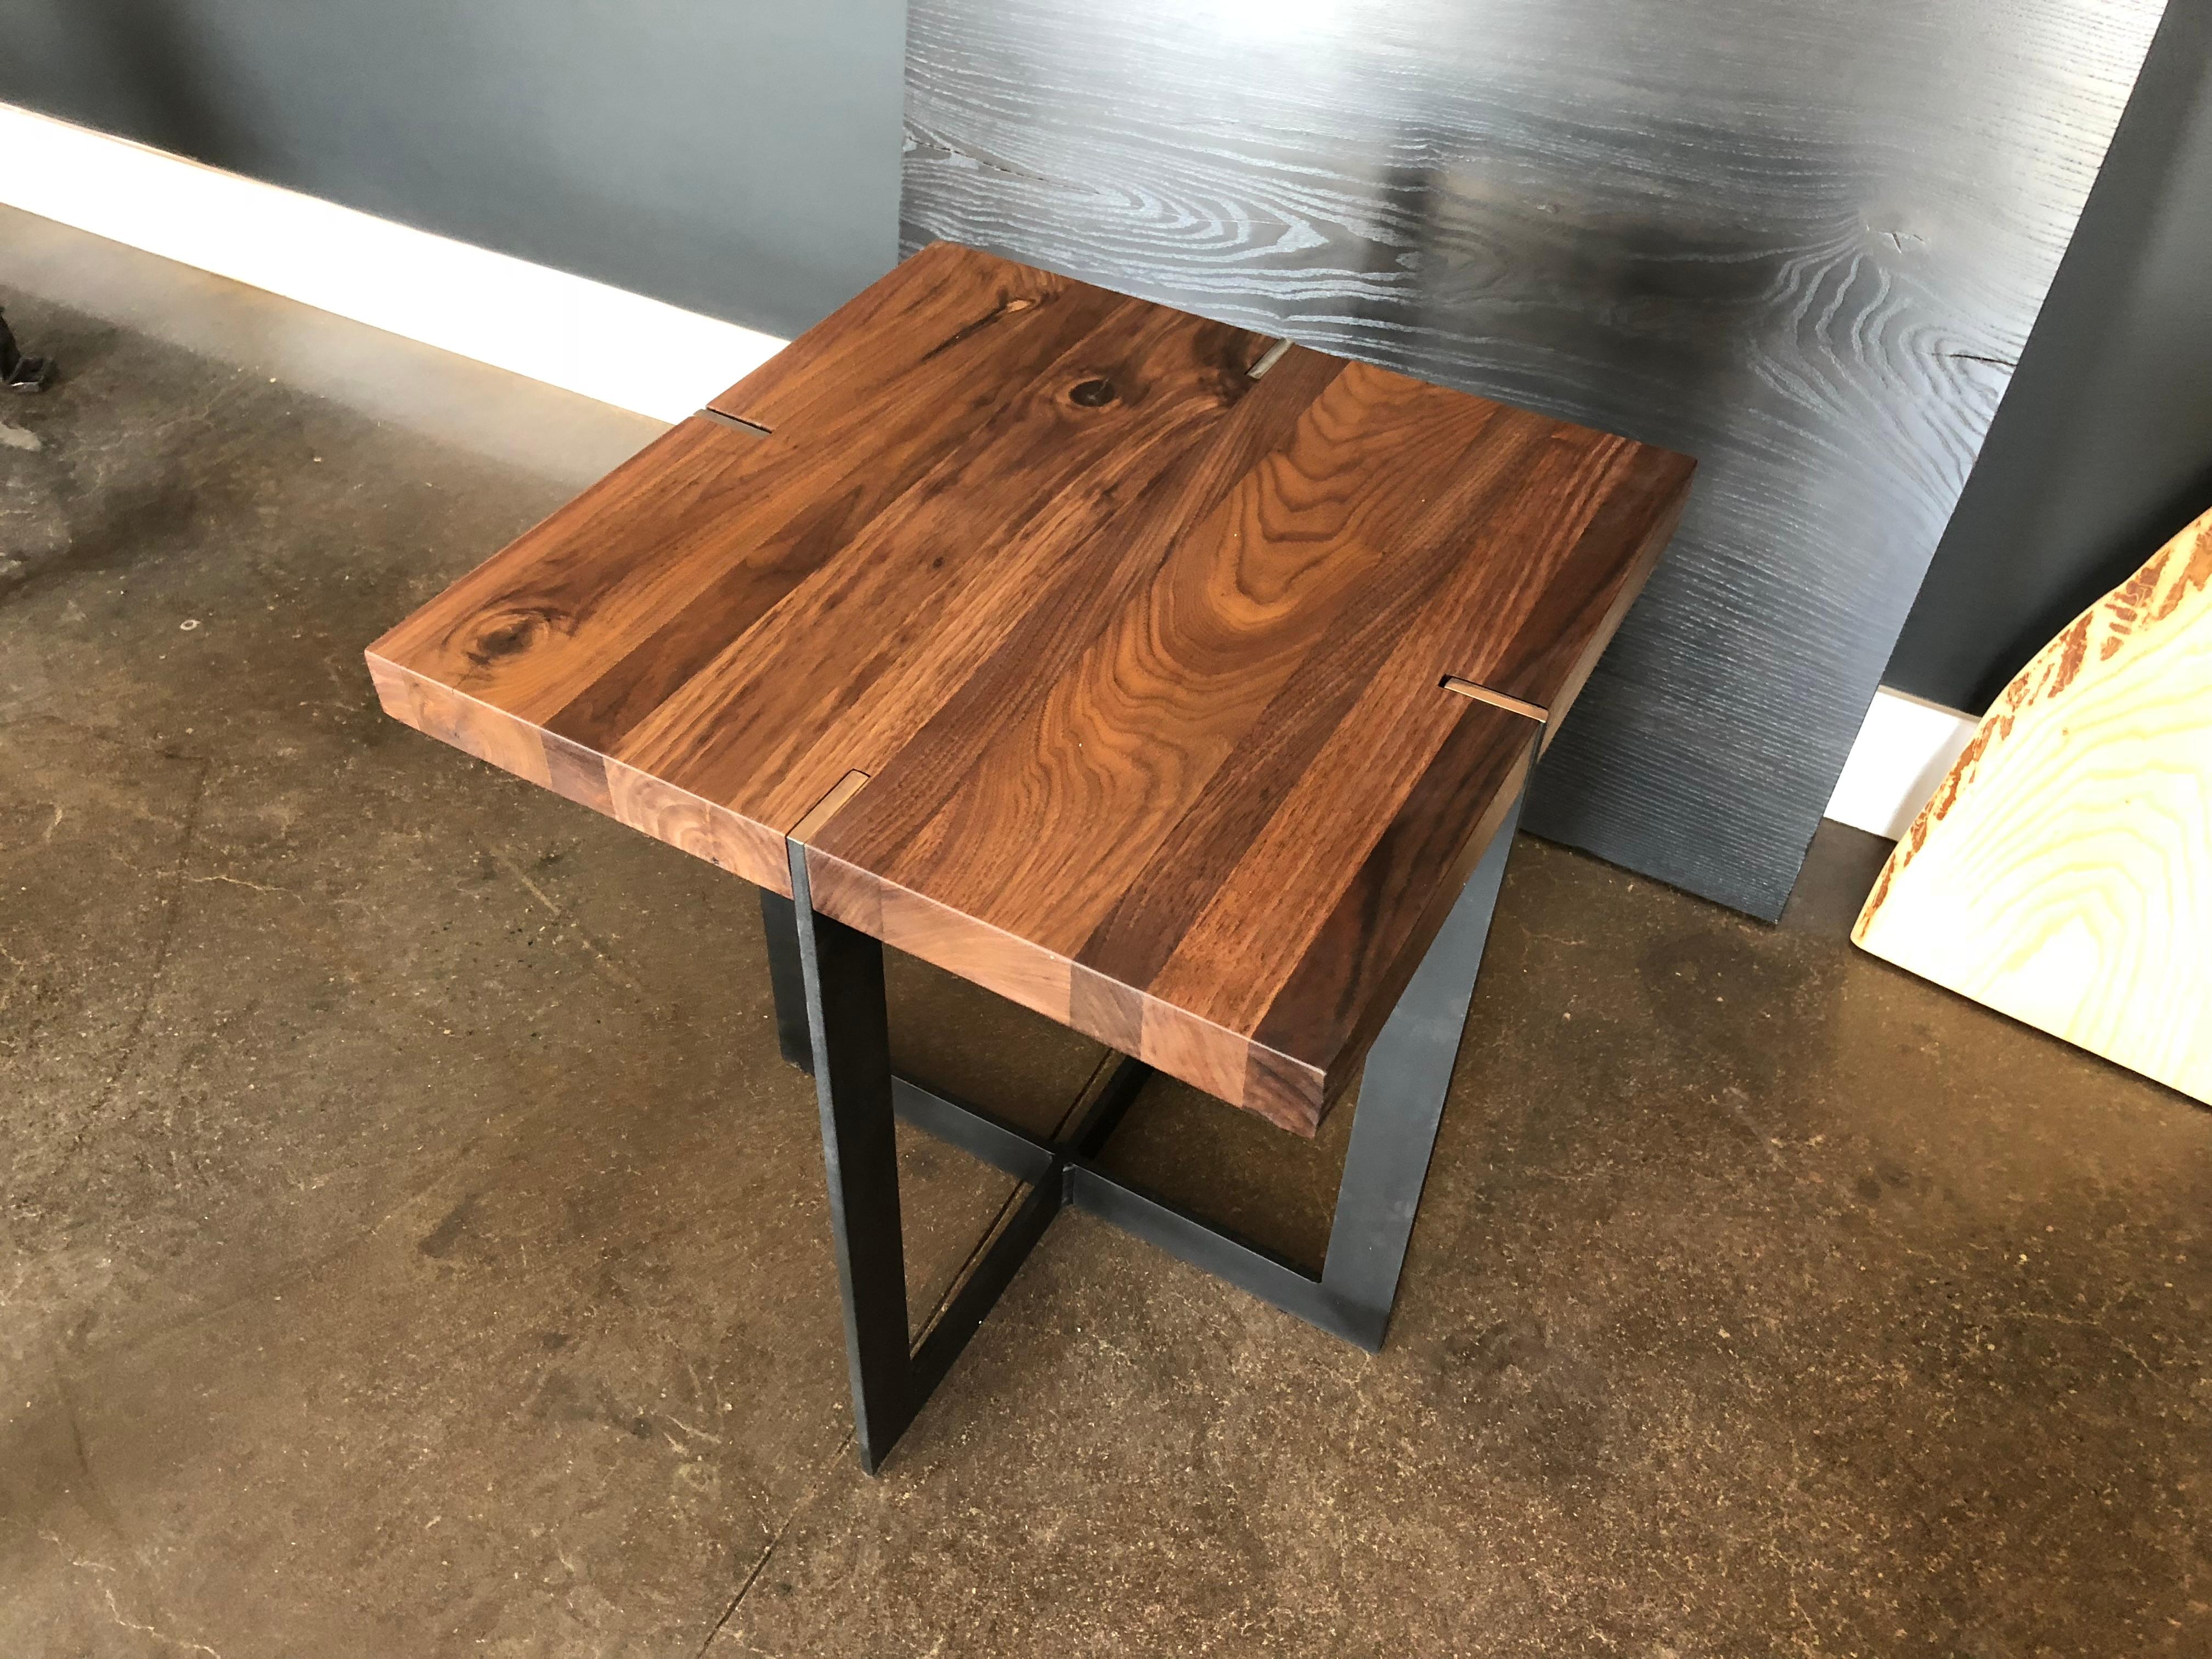 We are offering this beautiful black walnut square end tables to use by your couch. It comes in black walnut and can also be done in maple, ash, white oak, and other species. We offer any color match stain. We make the sample and send it to you for